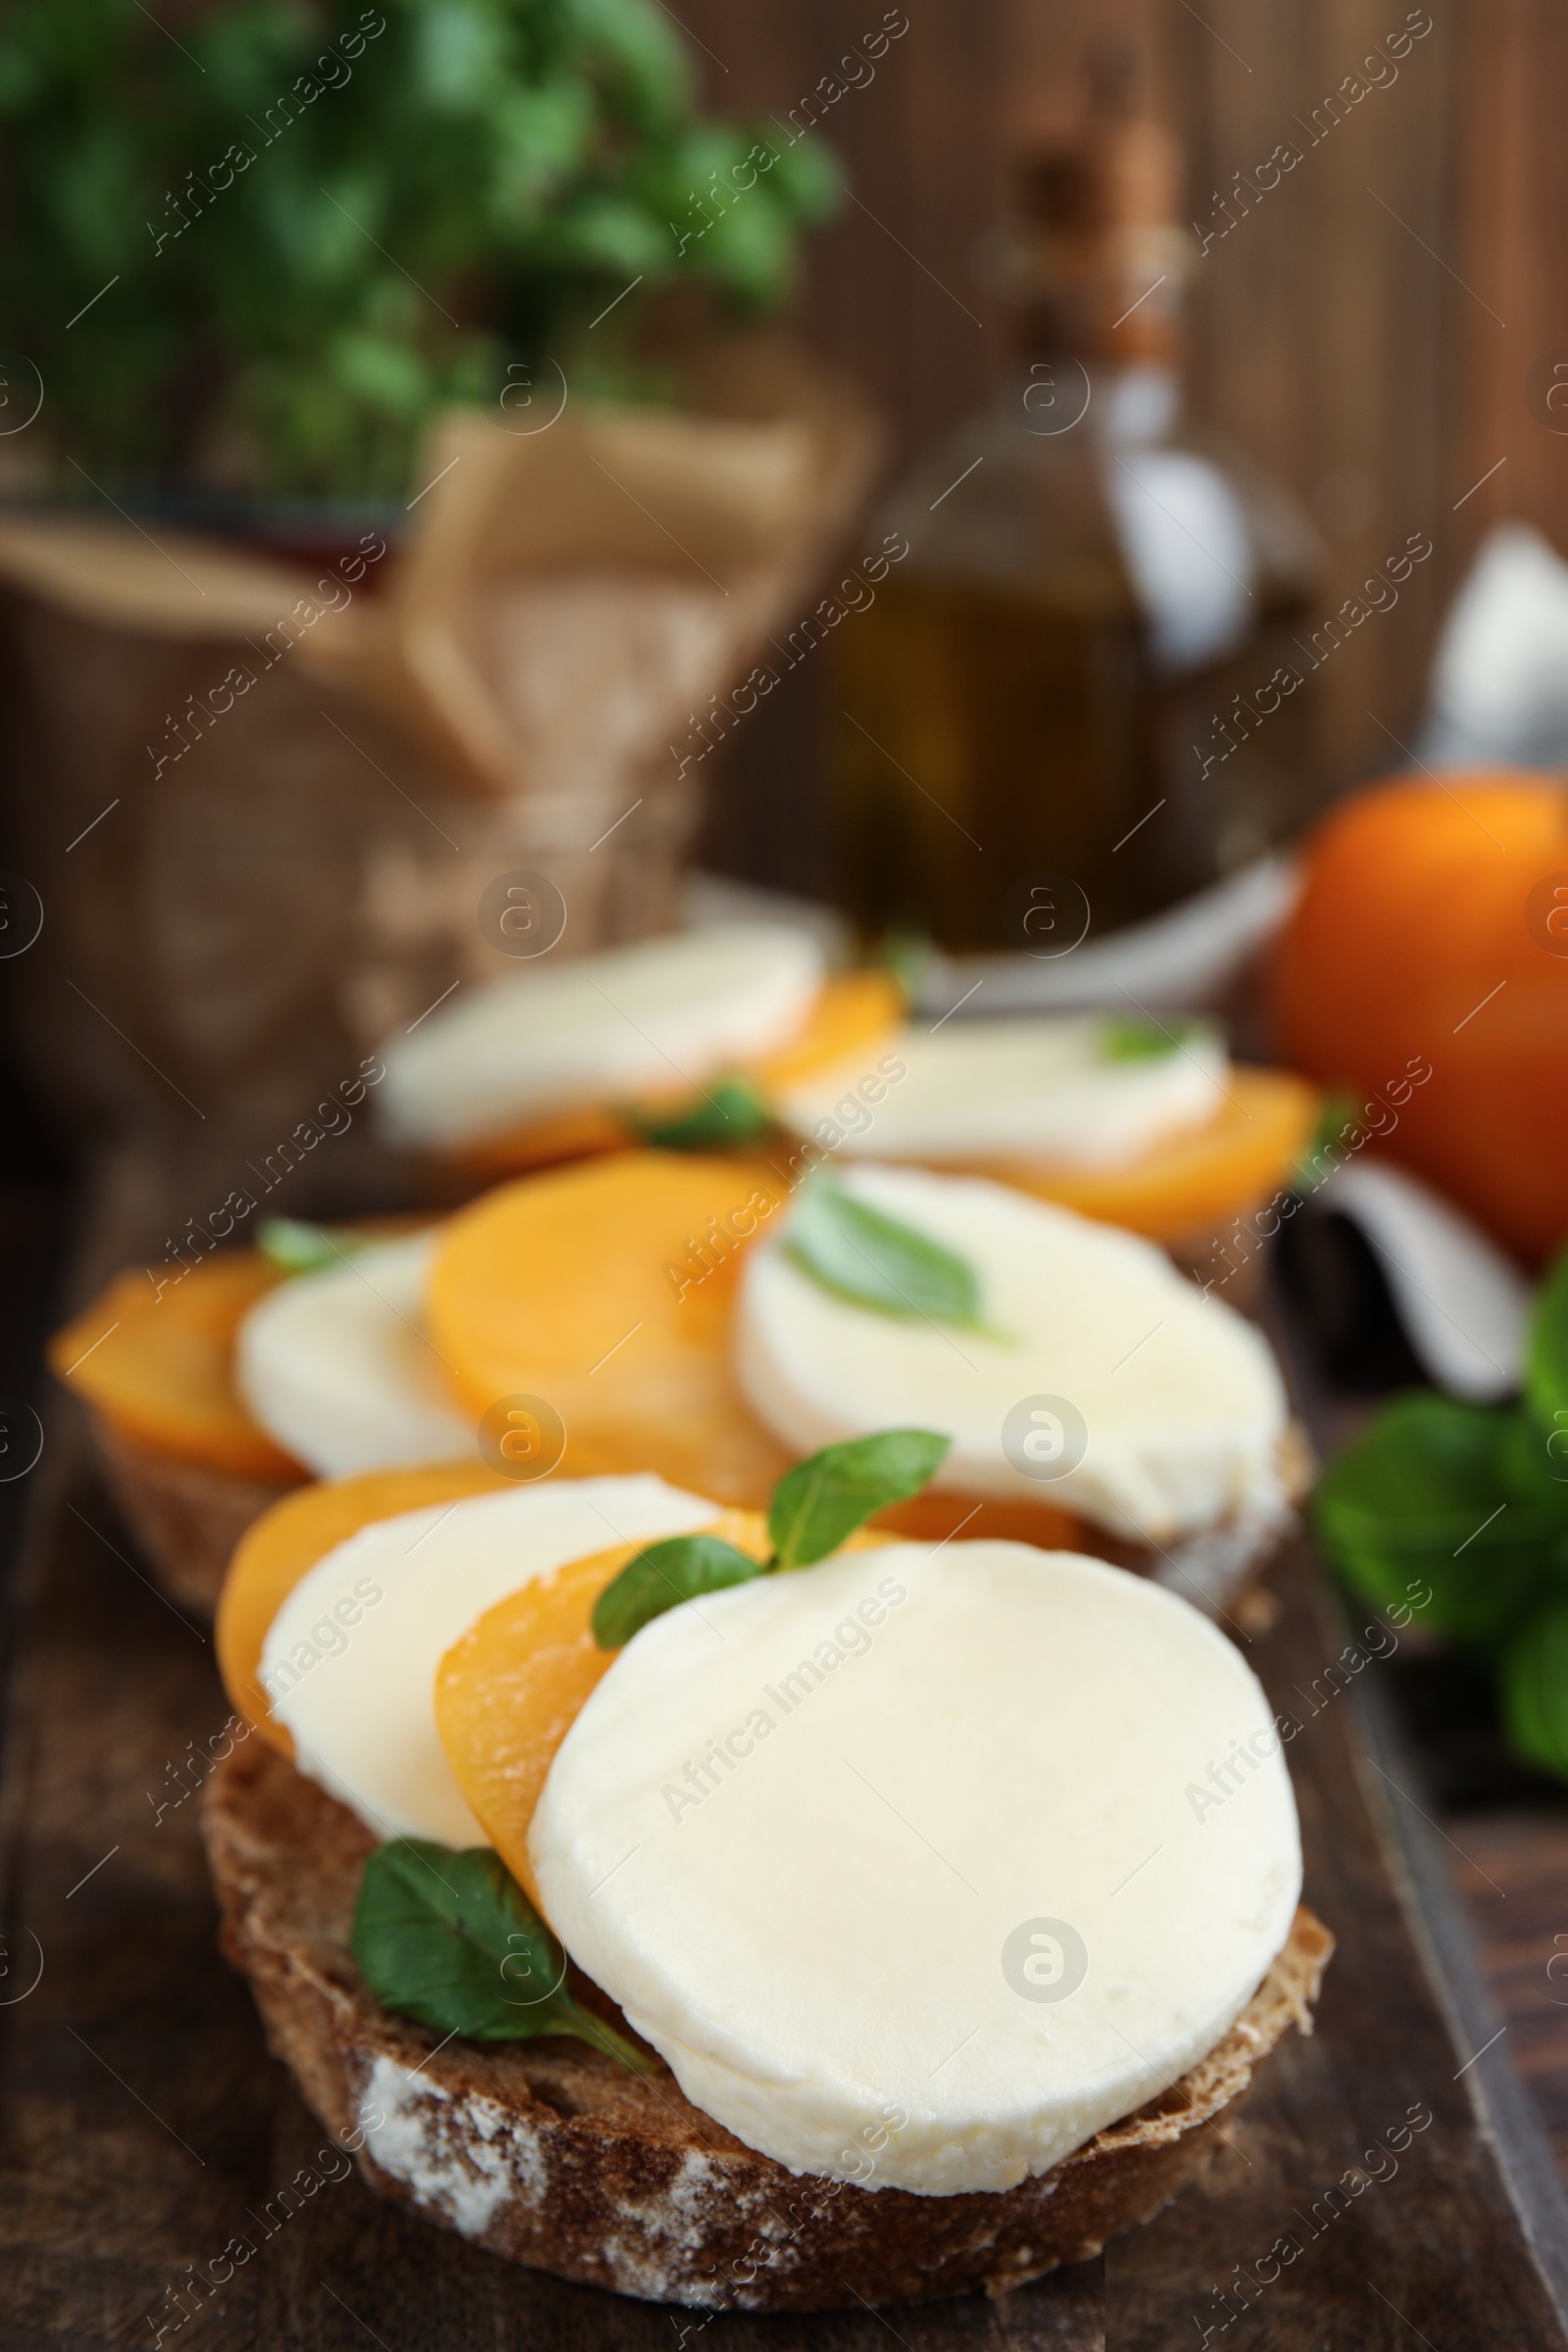 Photo of Delicious sandwiches with mozzarella, yellow tomatoes and basil on wooden board